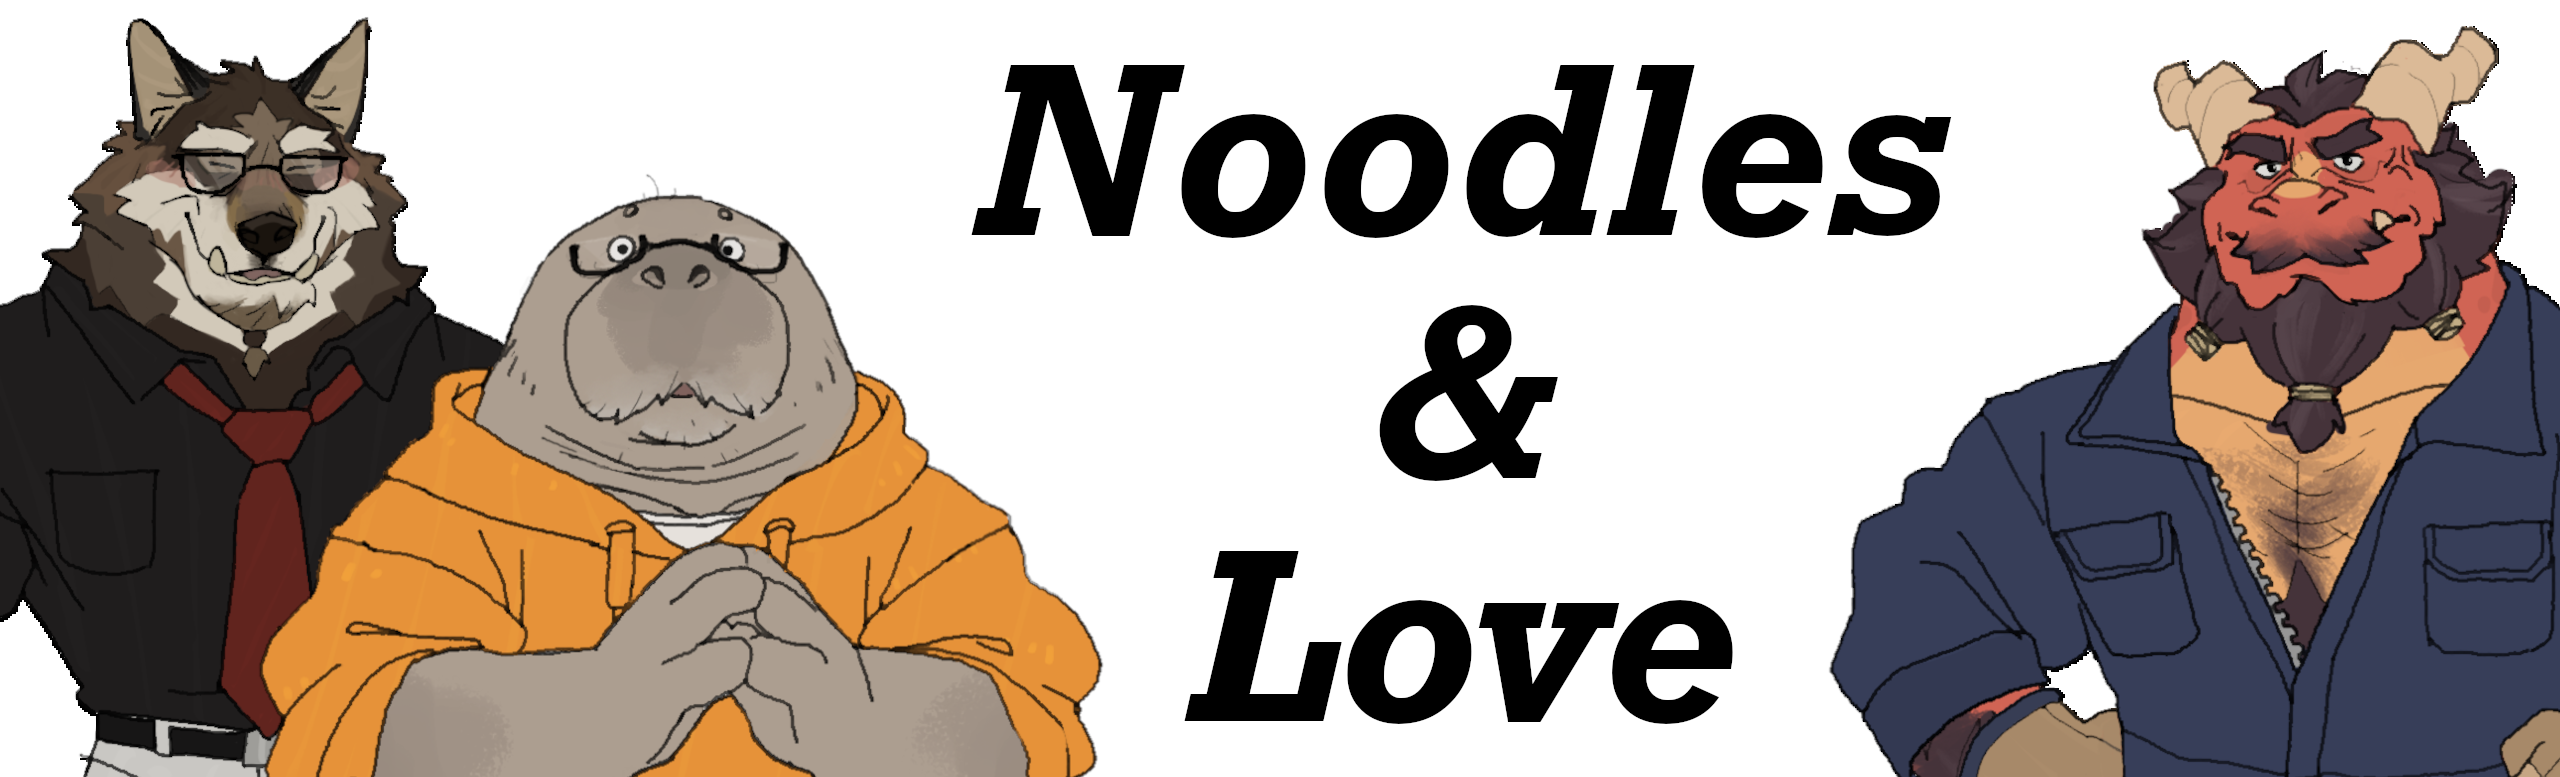 Noodles & Love (release 1.1 - for playdate)